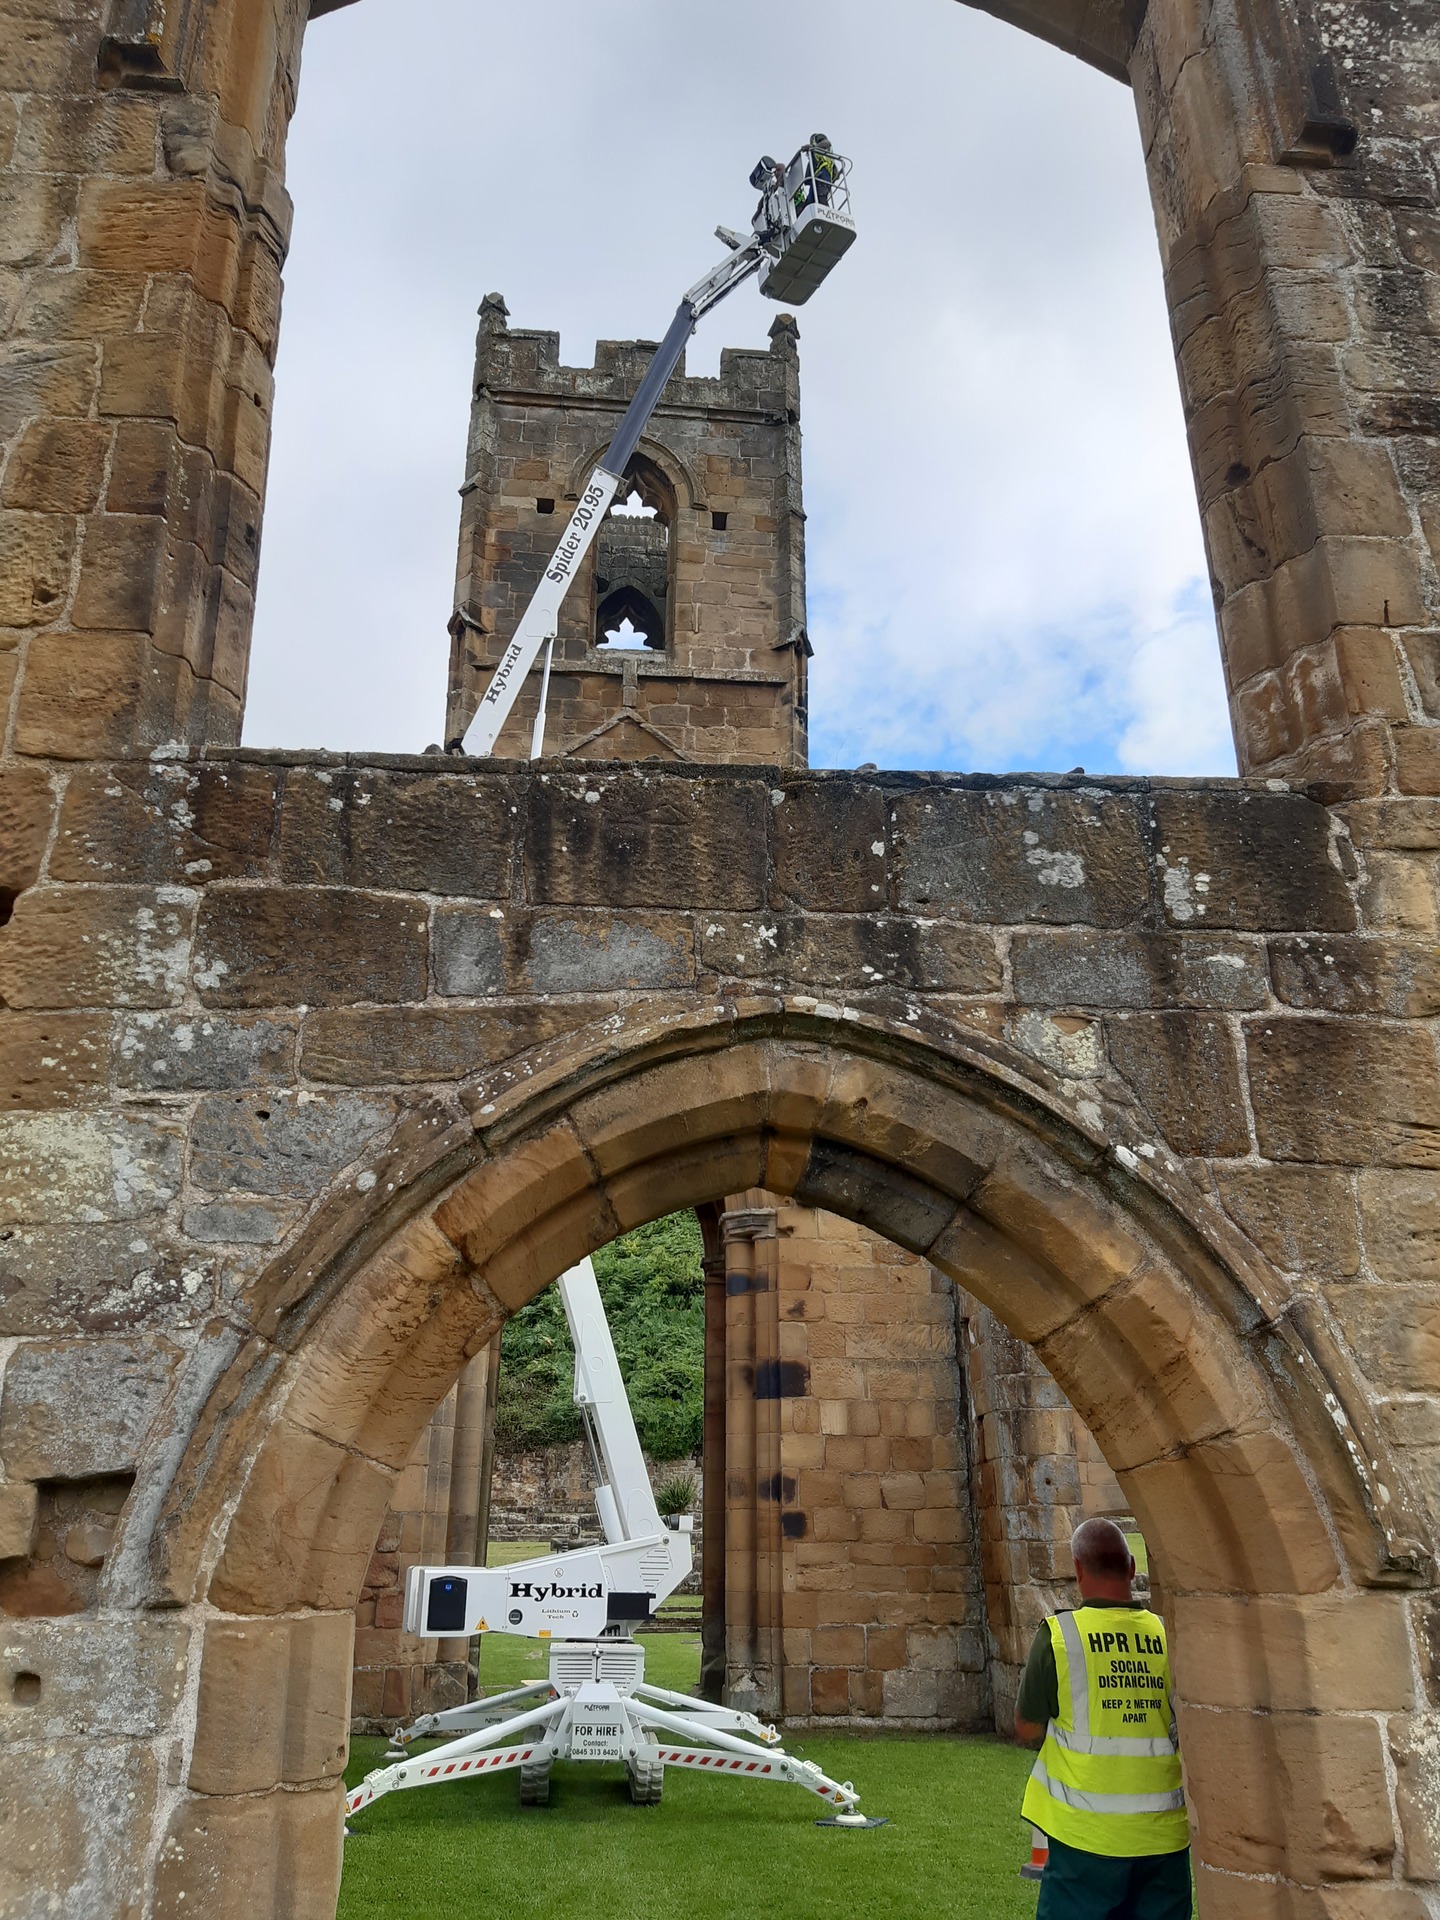 Lottie, High Reaching Solutions 20m Lithium hybrid tracked spider lift access platform at nearly full height assisting with a stone survey at a ruined abbey near Northallerton, North Yorkshire